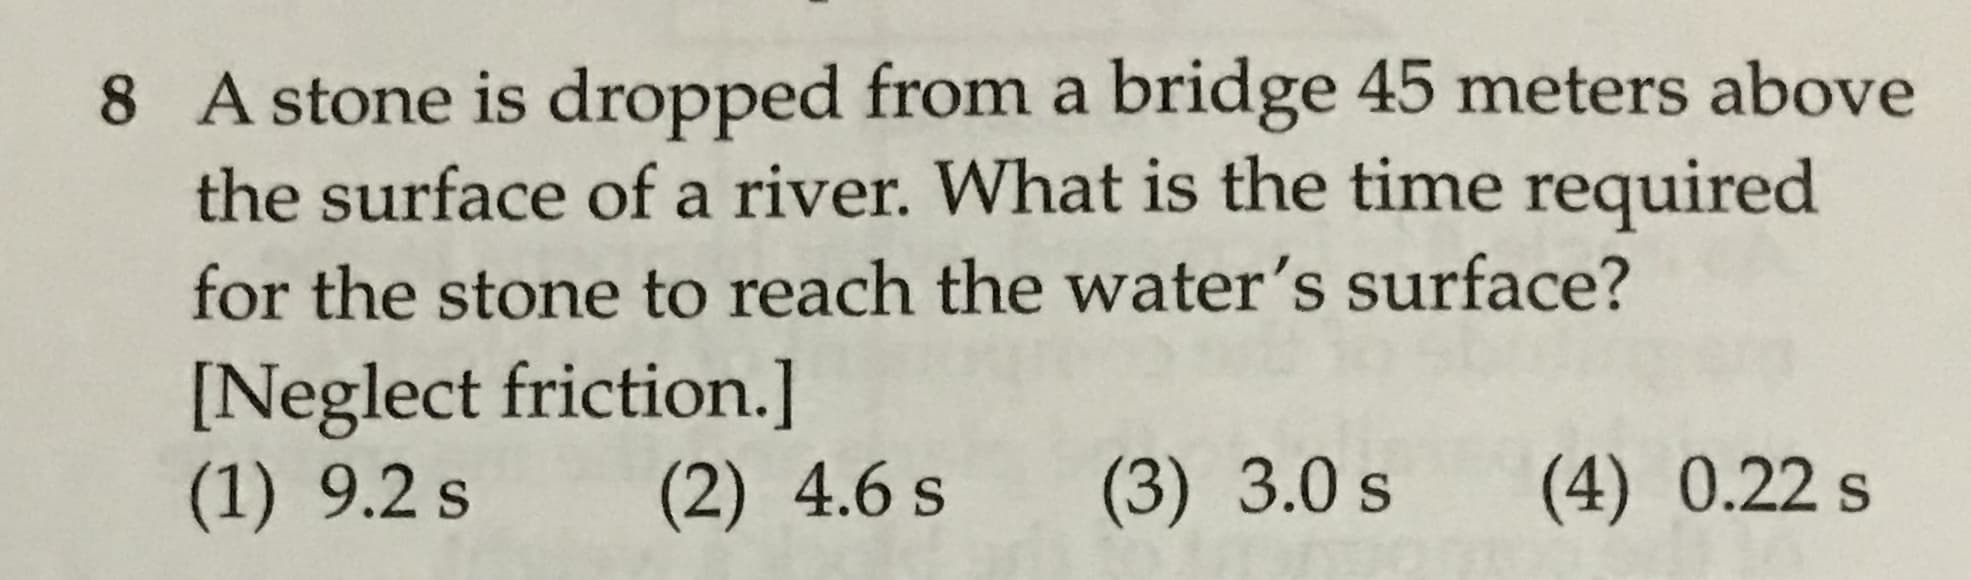 8 A stone is dropped froma bridge 45 meters above
the surface of a river. What is the time required
for the stone to reach the water's surface?
[Neglect friction.]
(1) 9.2 s
(2) 4.6 s
(3) 3.0 s
(4) 0.22 s
